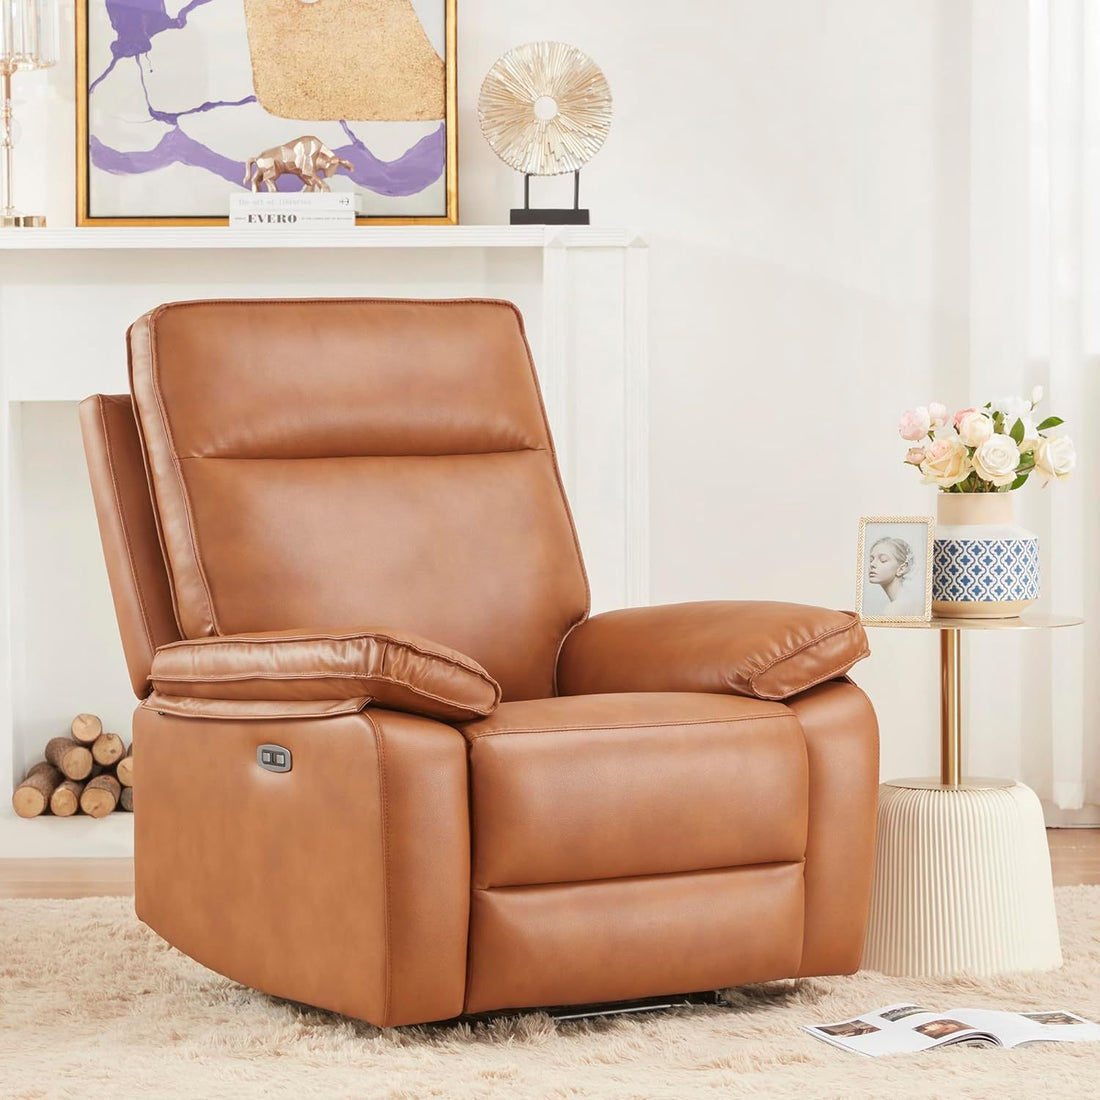 Electric Power Recliner Chair With Usb Port,